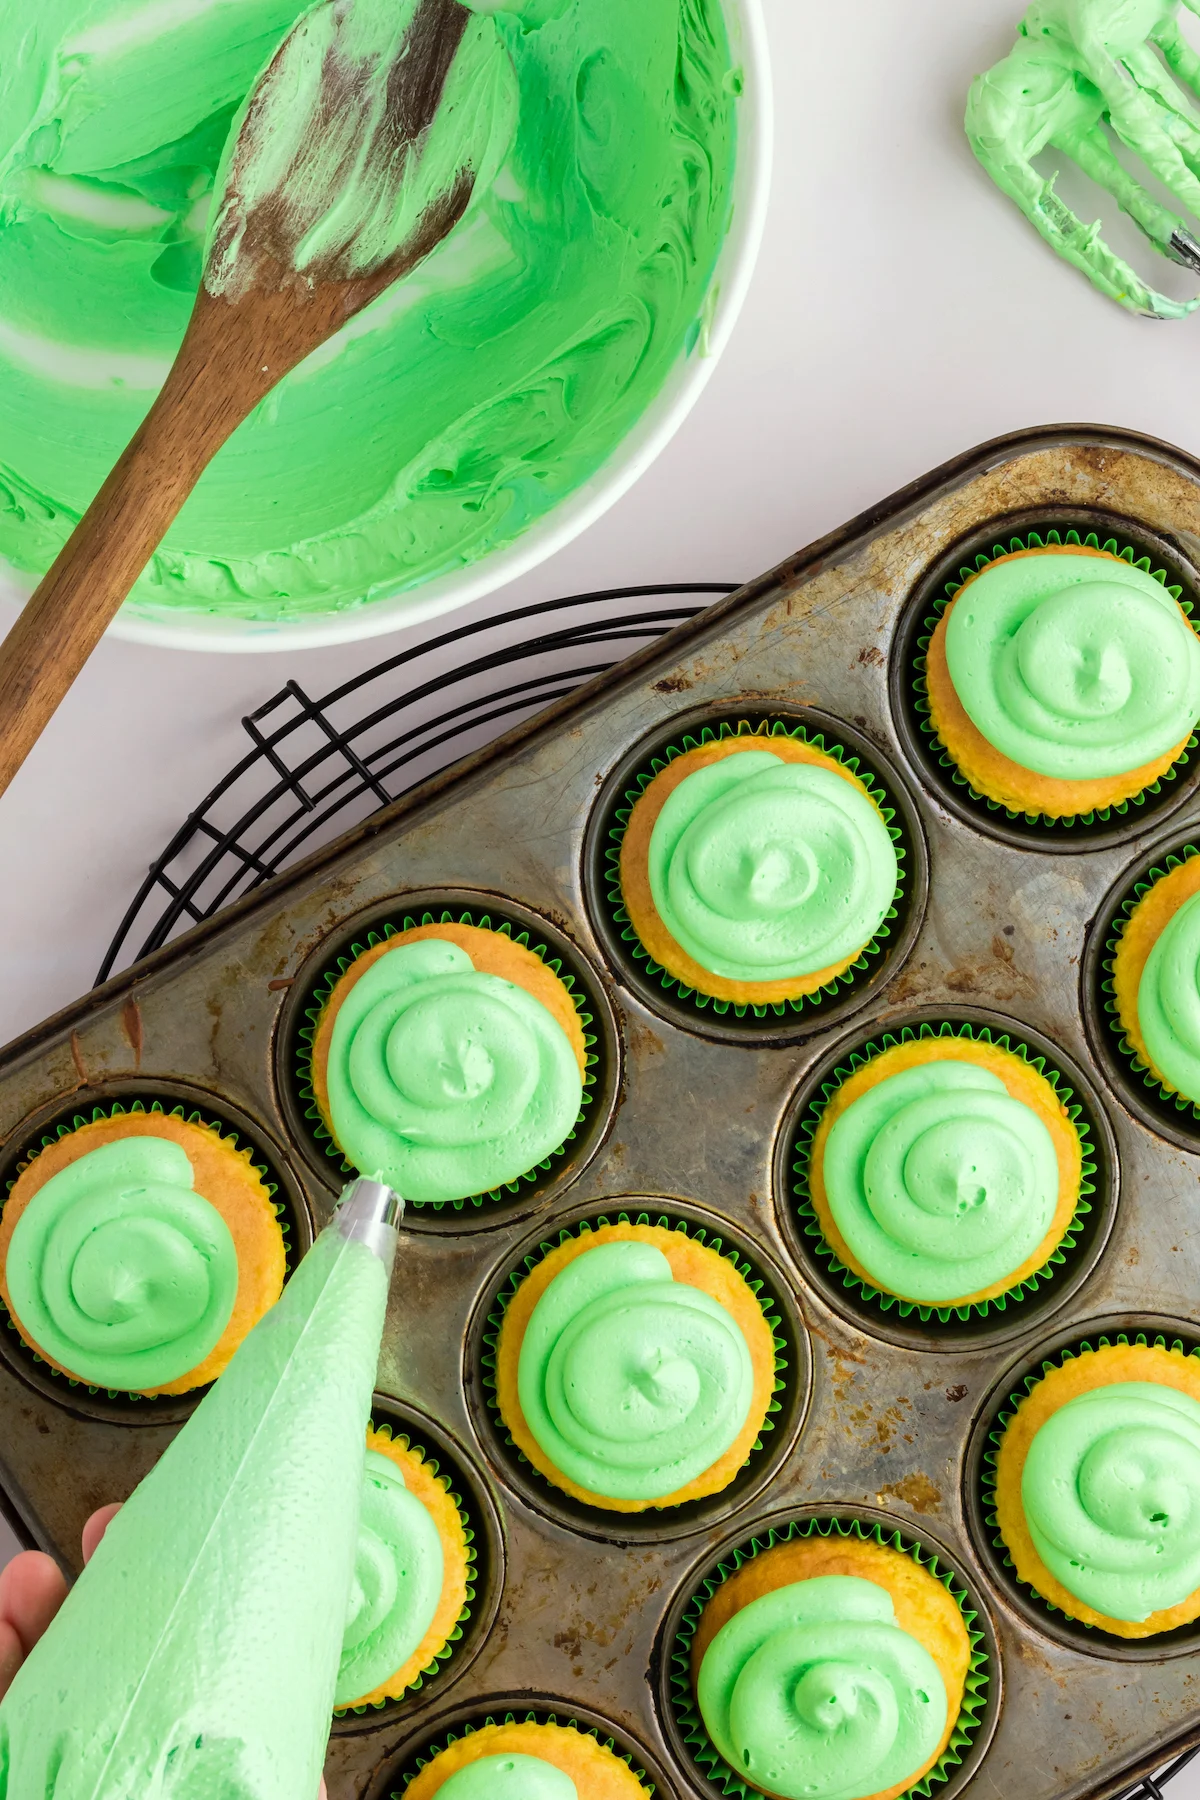 Frosting vanilla cupcakes with green frosting using a piping bag